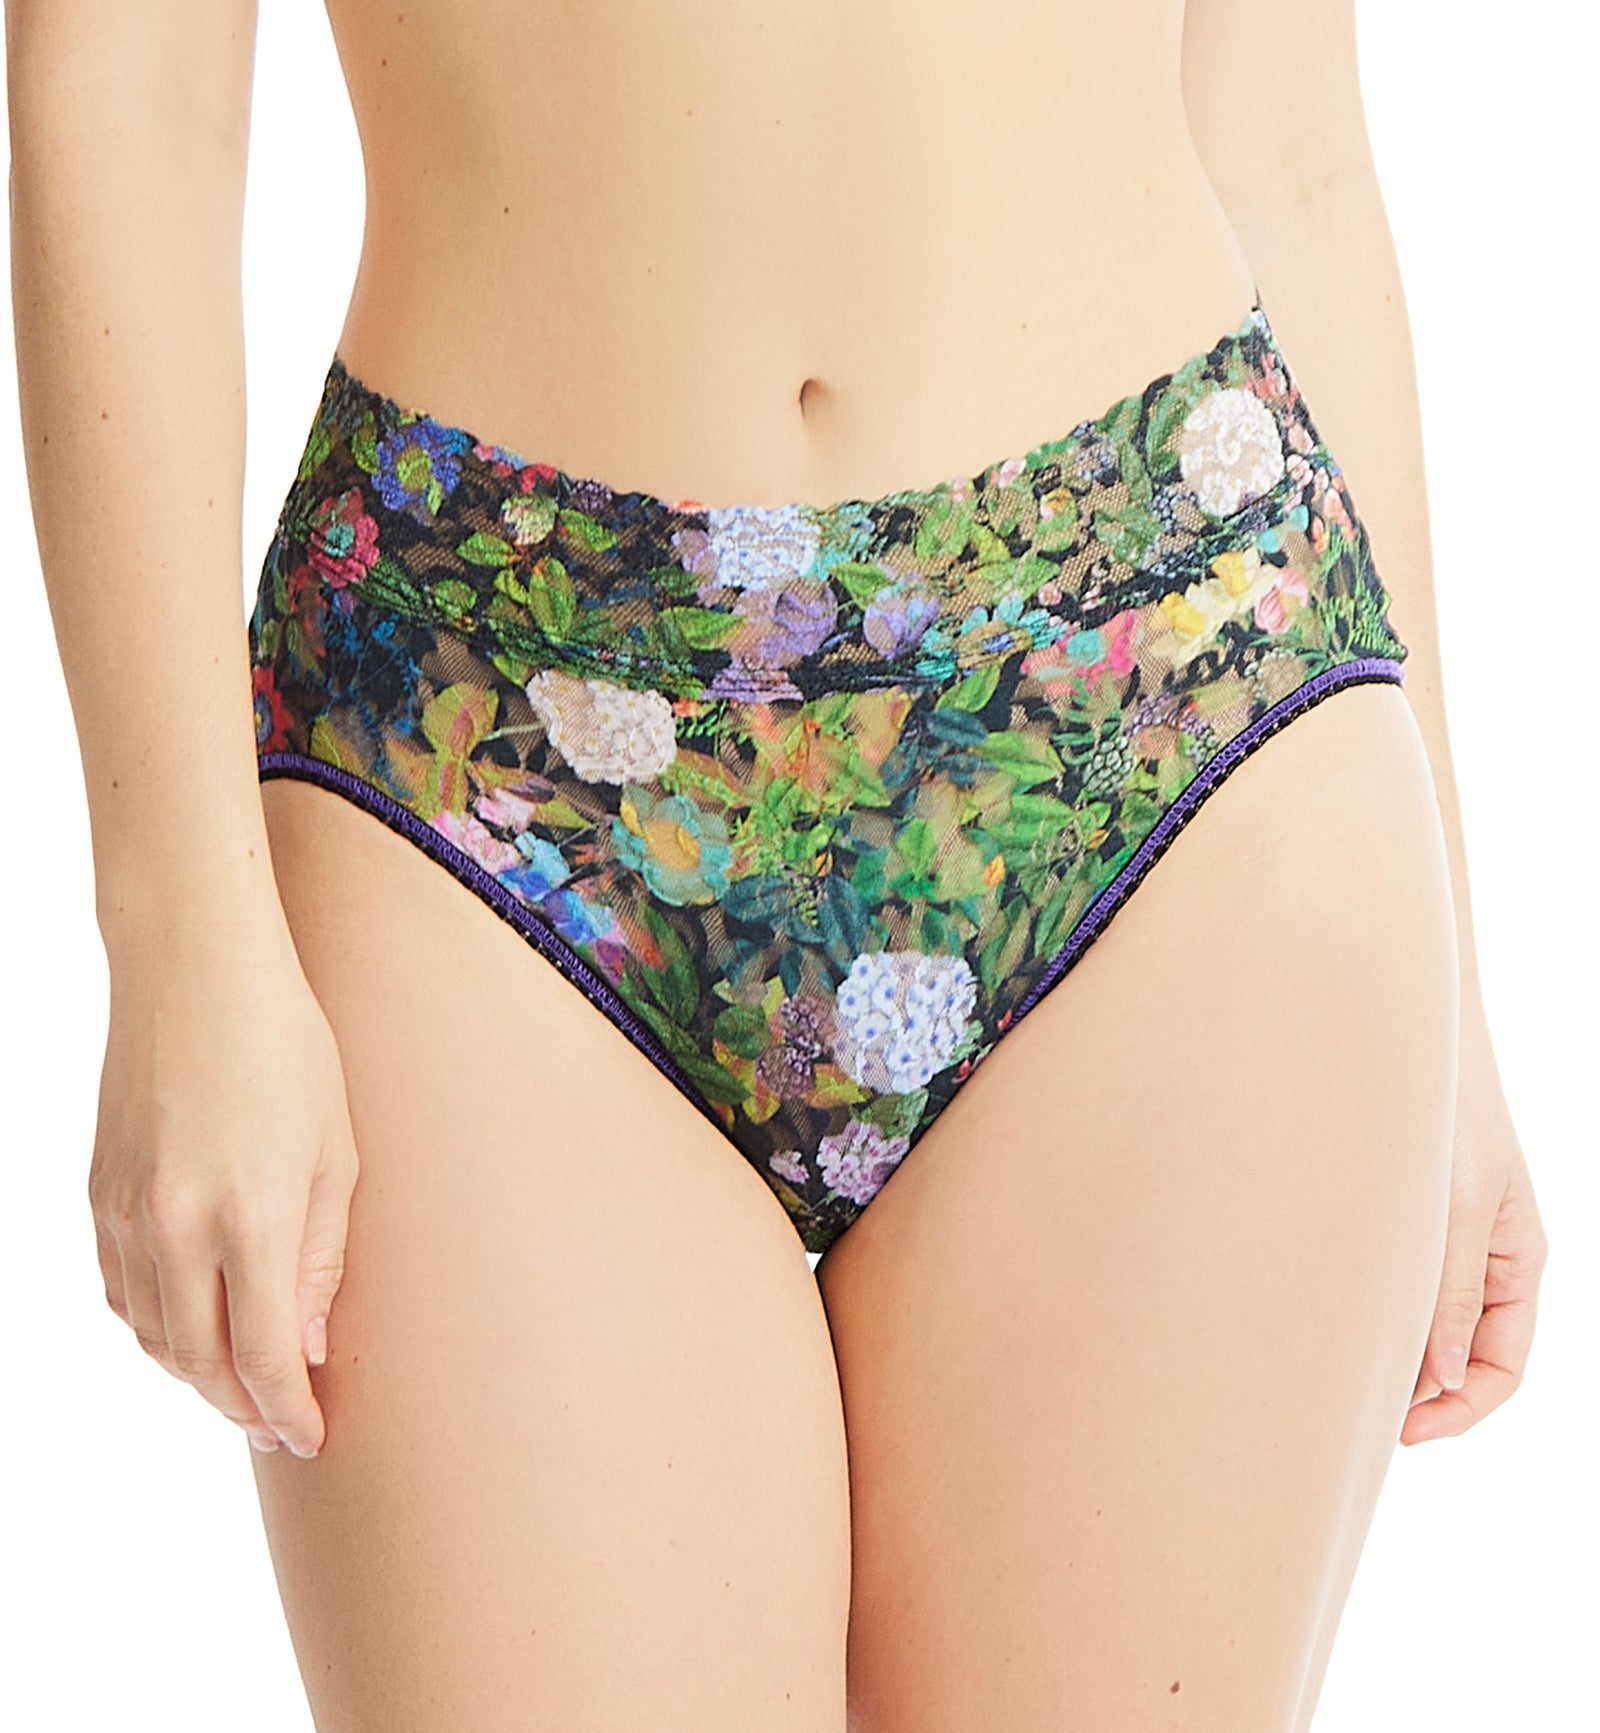 Hanky Panky Signature Lace Printed French Brief (PR461),Small,Voices on the Veranda - Voices on the Veranda,Small